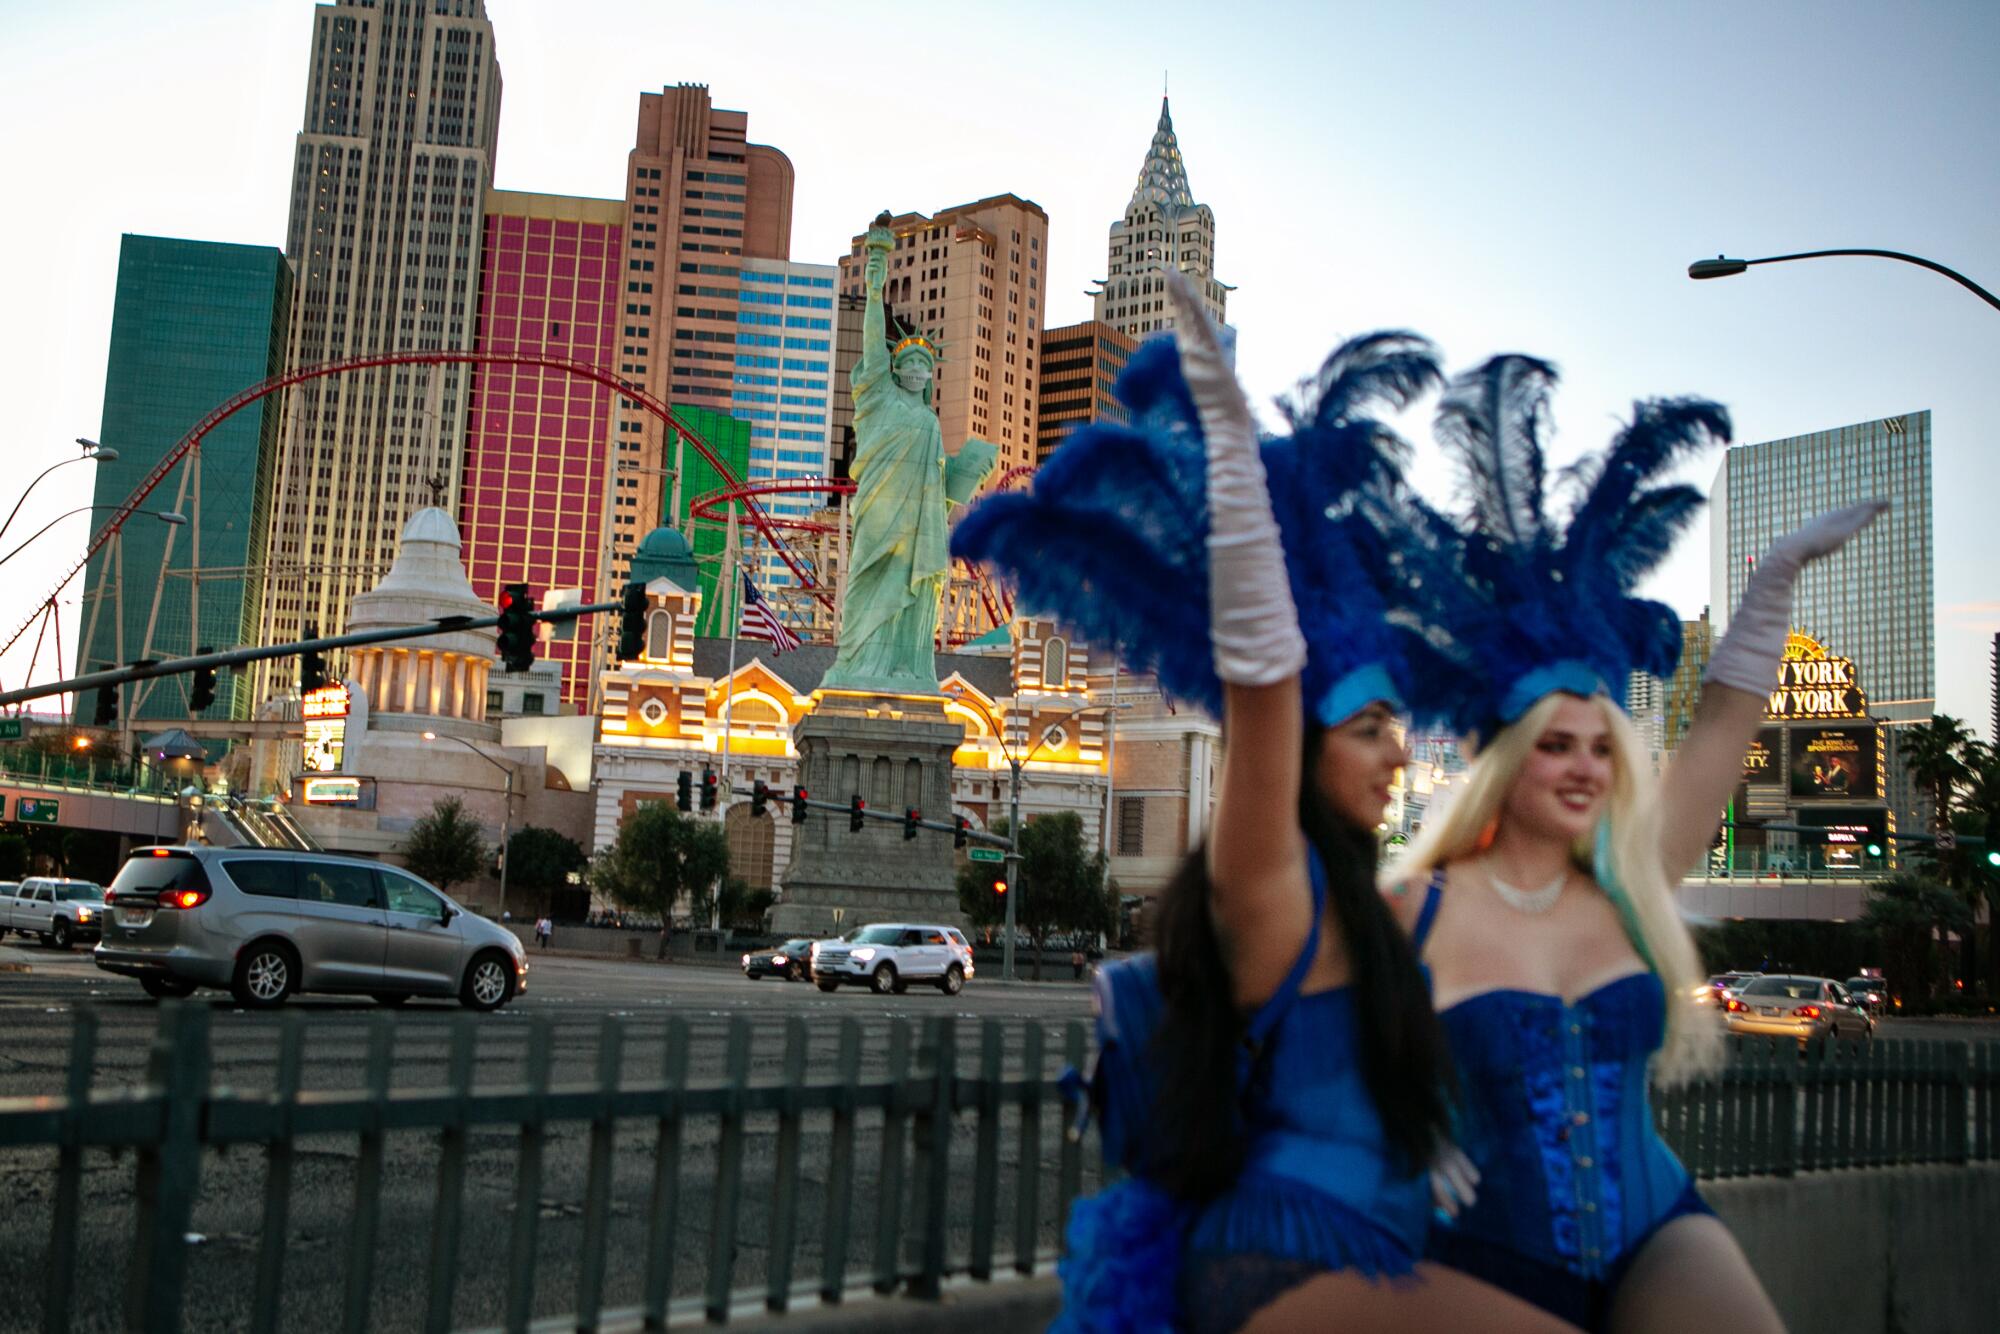 Two Vegas showgirls in blue outfits and feathered hats raise their arms in the air on the Strip